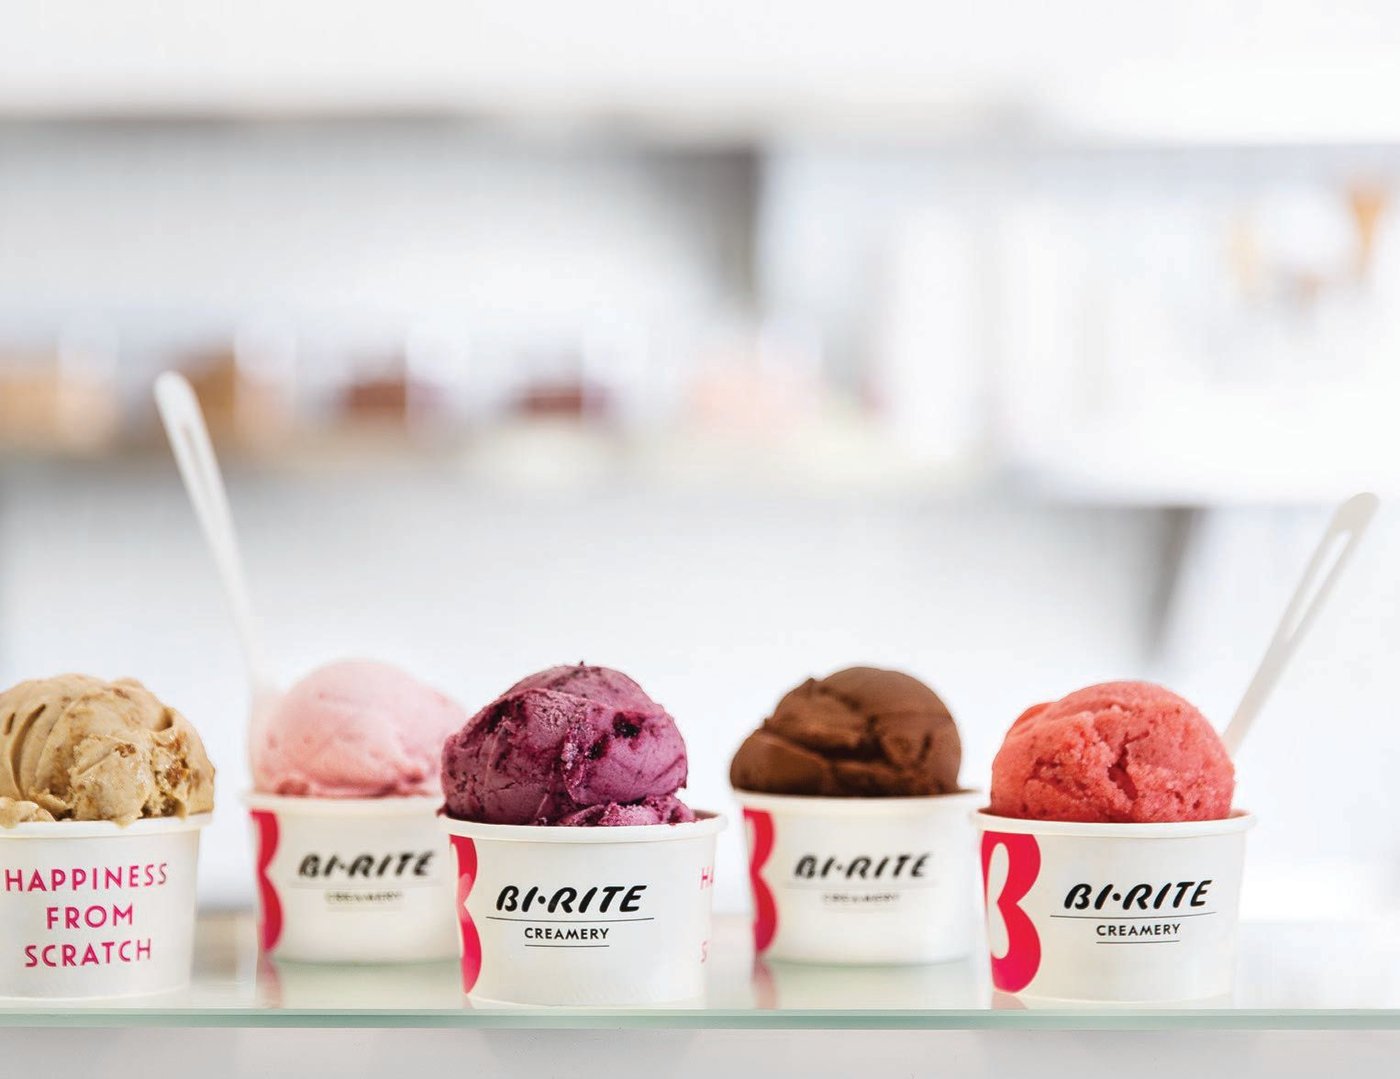 Spring is in the air, and right now is the time to cool down with a delicious treat from one of these local spots. PHOTO COURTESY OF BI-RITE CREAMERY